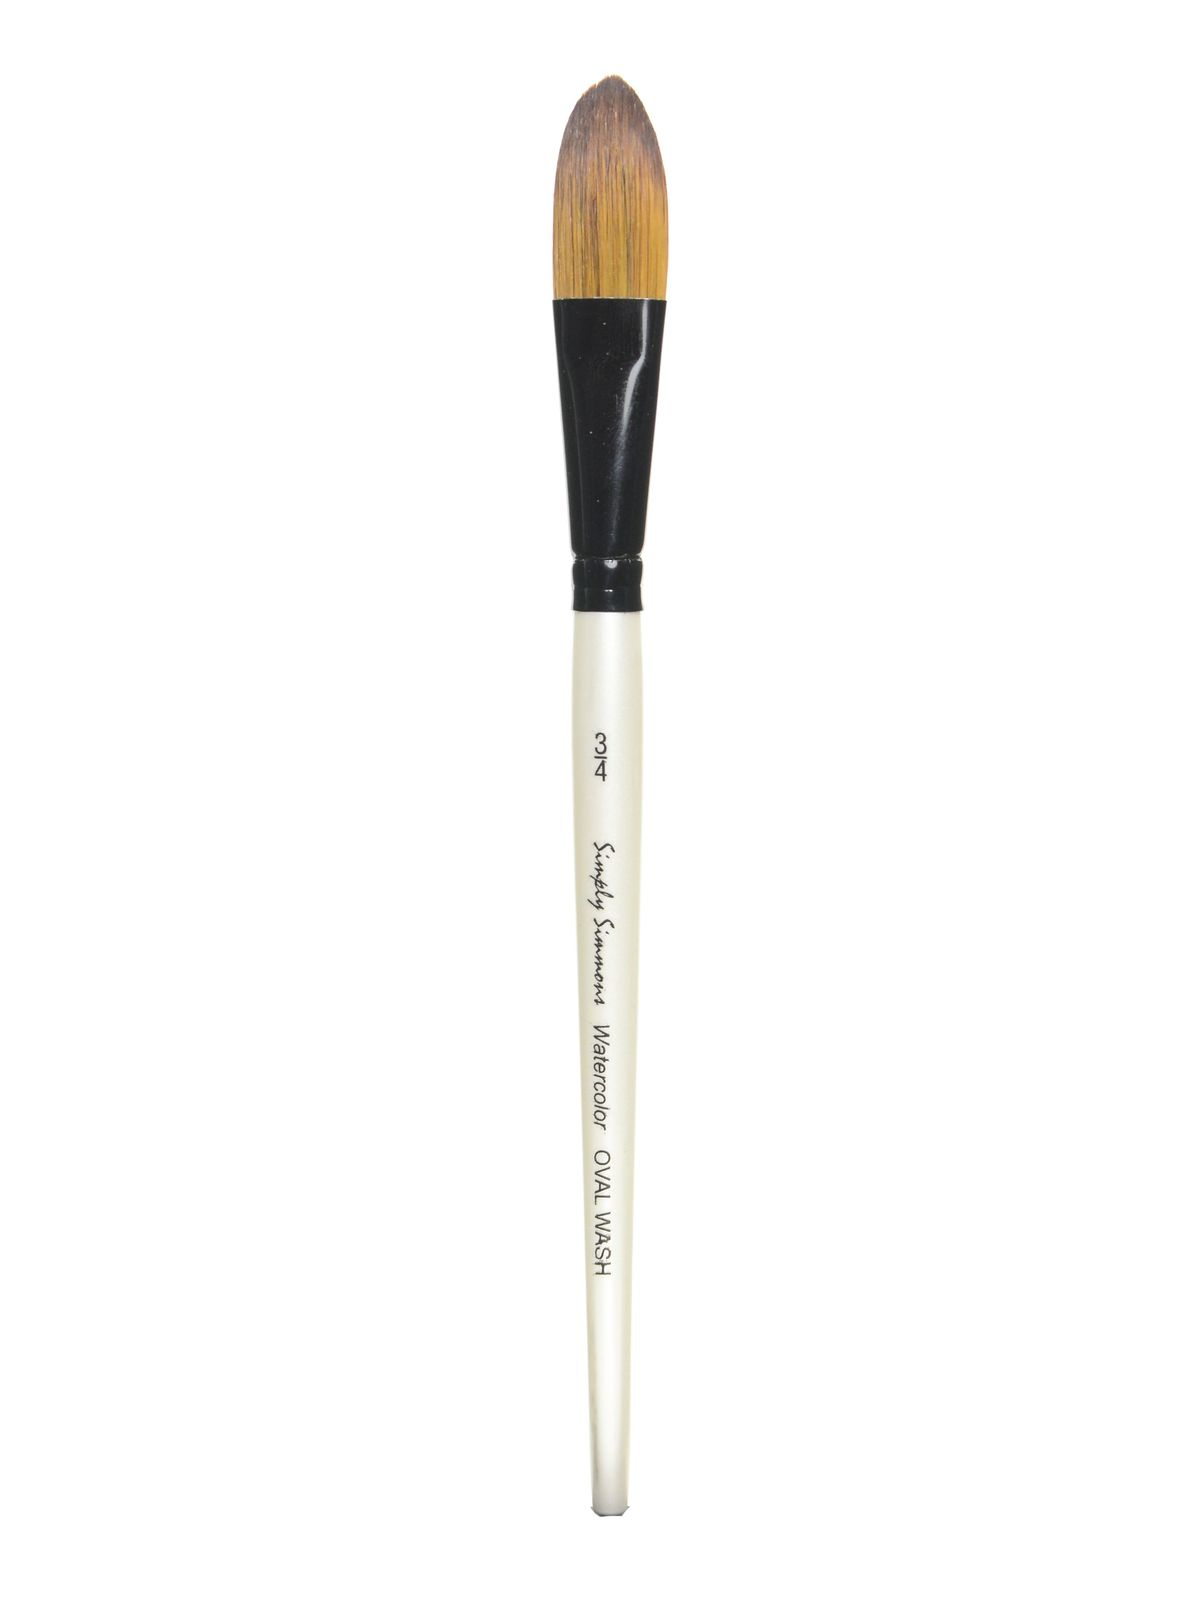 Simply Simmons Watercolor & Acrylic Short-handle Brushes 3 4 In. Oval Wash Pony Synthetic Mix